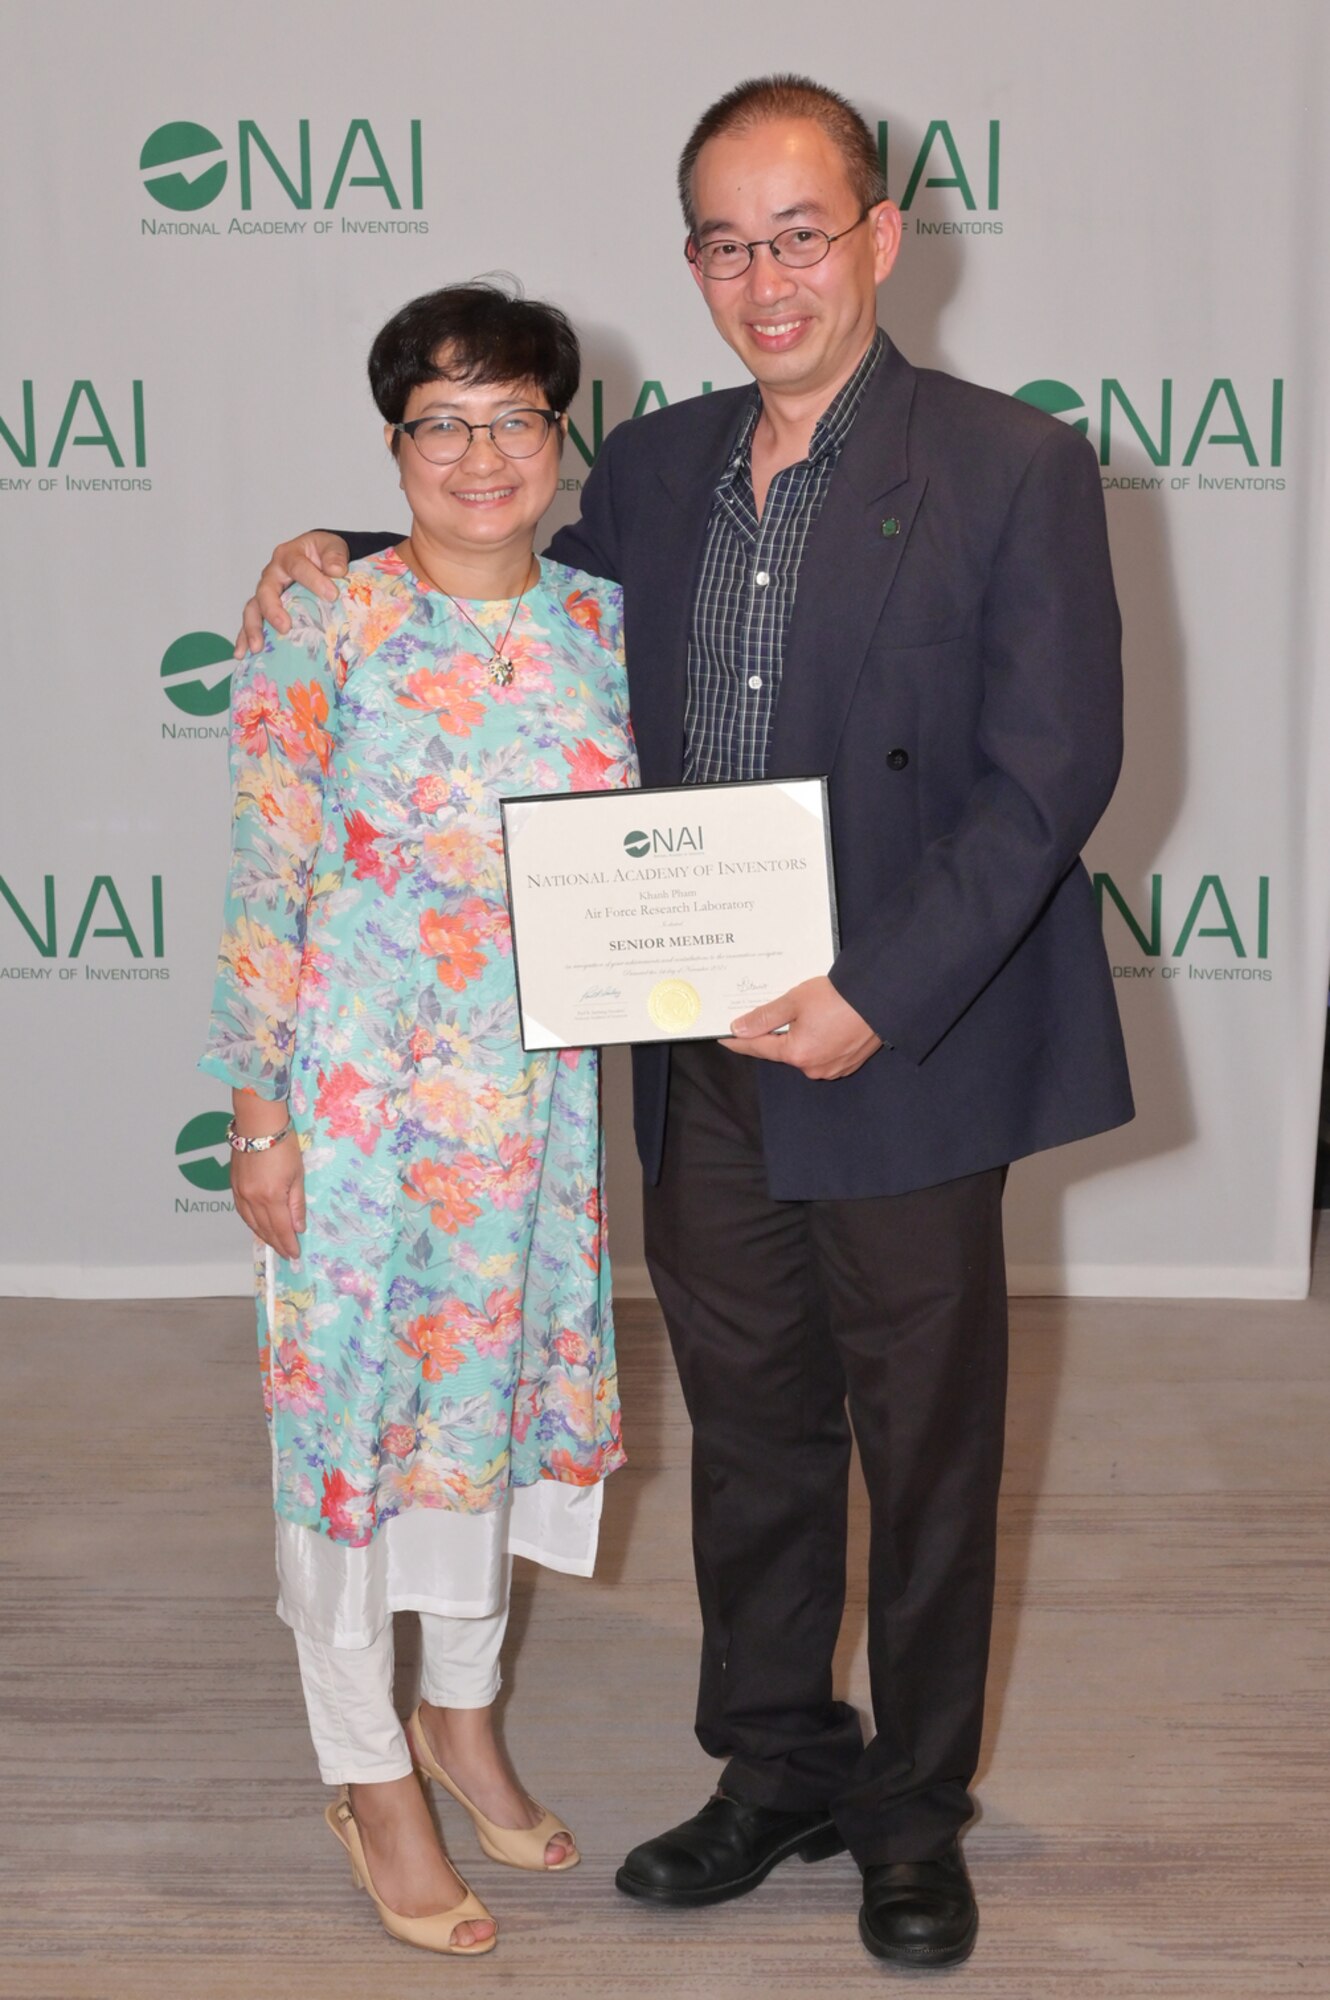 Air Force Research Laboratory principal aerospace engineer Dr. Khanh Pham with his wife Huong Nguyen at the National Academy of Inventors induction to the rank of NAI Senior Member in a ceremony held earlier this year in Tampa, Florida. (Photo/courtesy of NAI)